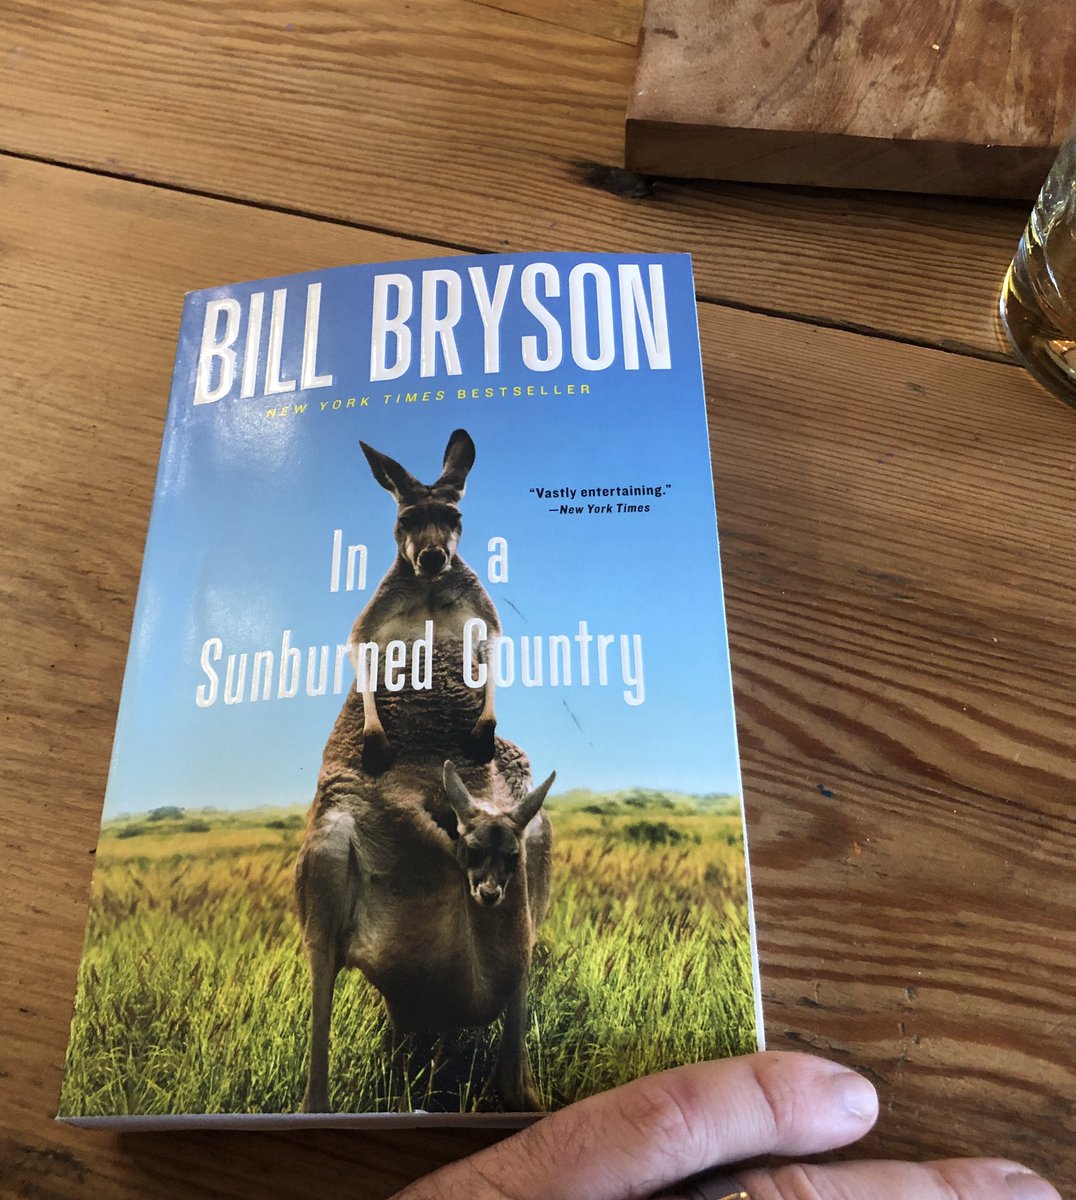 This is mine. My third Bill Bryson book. Brilliant and hilarious writer.